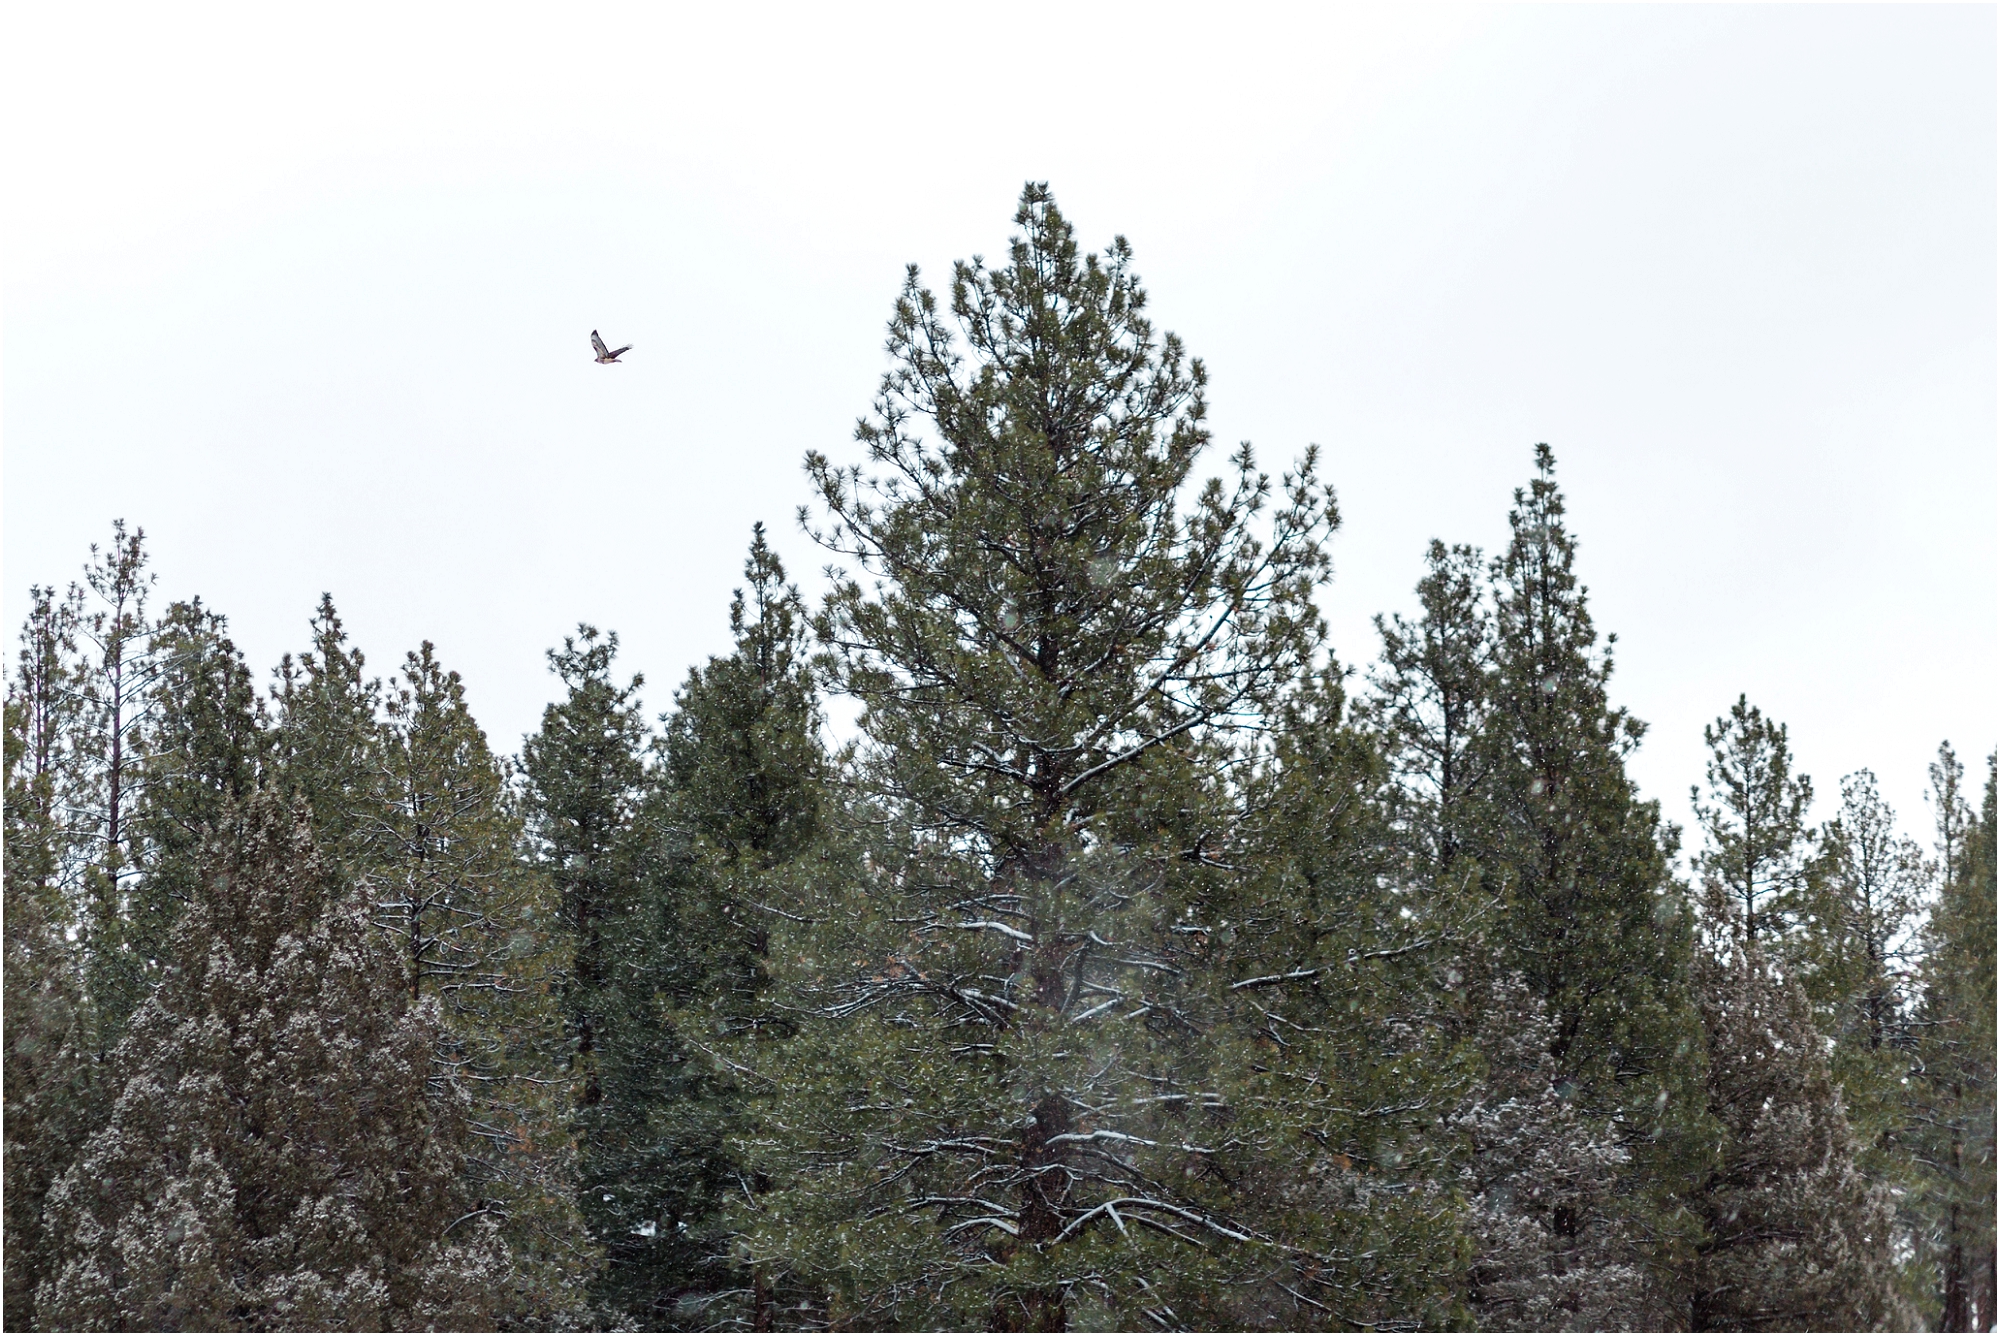 A hawk flies over the pines at this Central Oregon winter elopement near Five Pine Lodge in Sisters. | Erica Swantek Photography